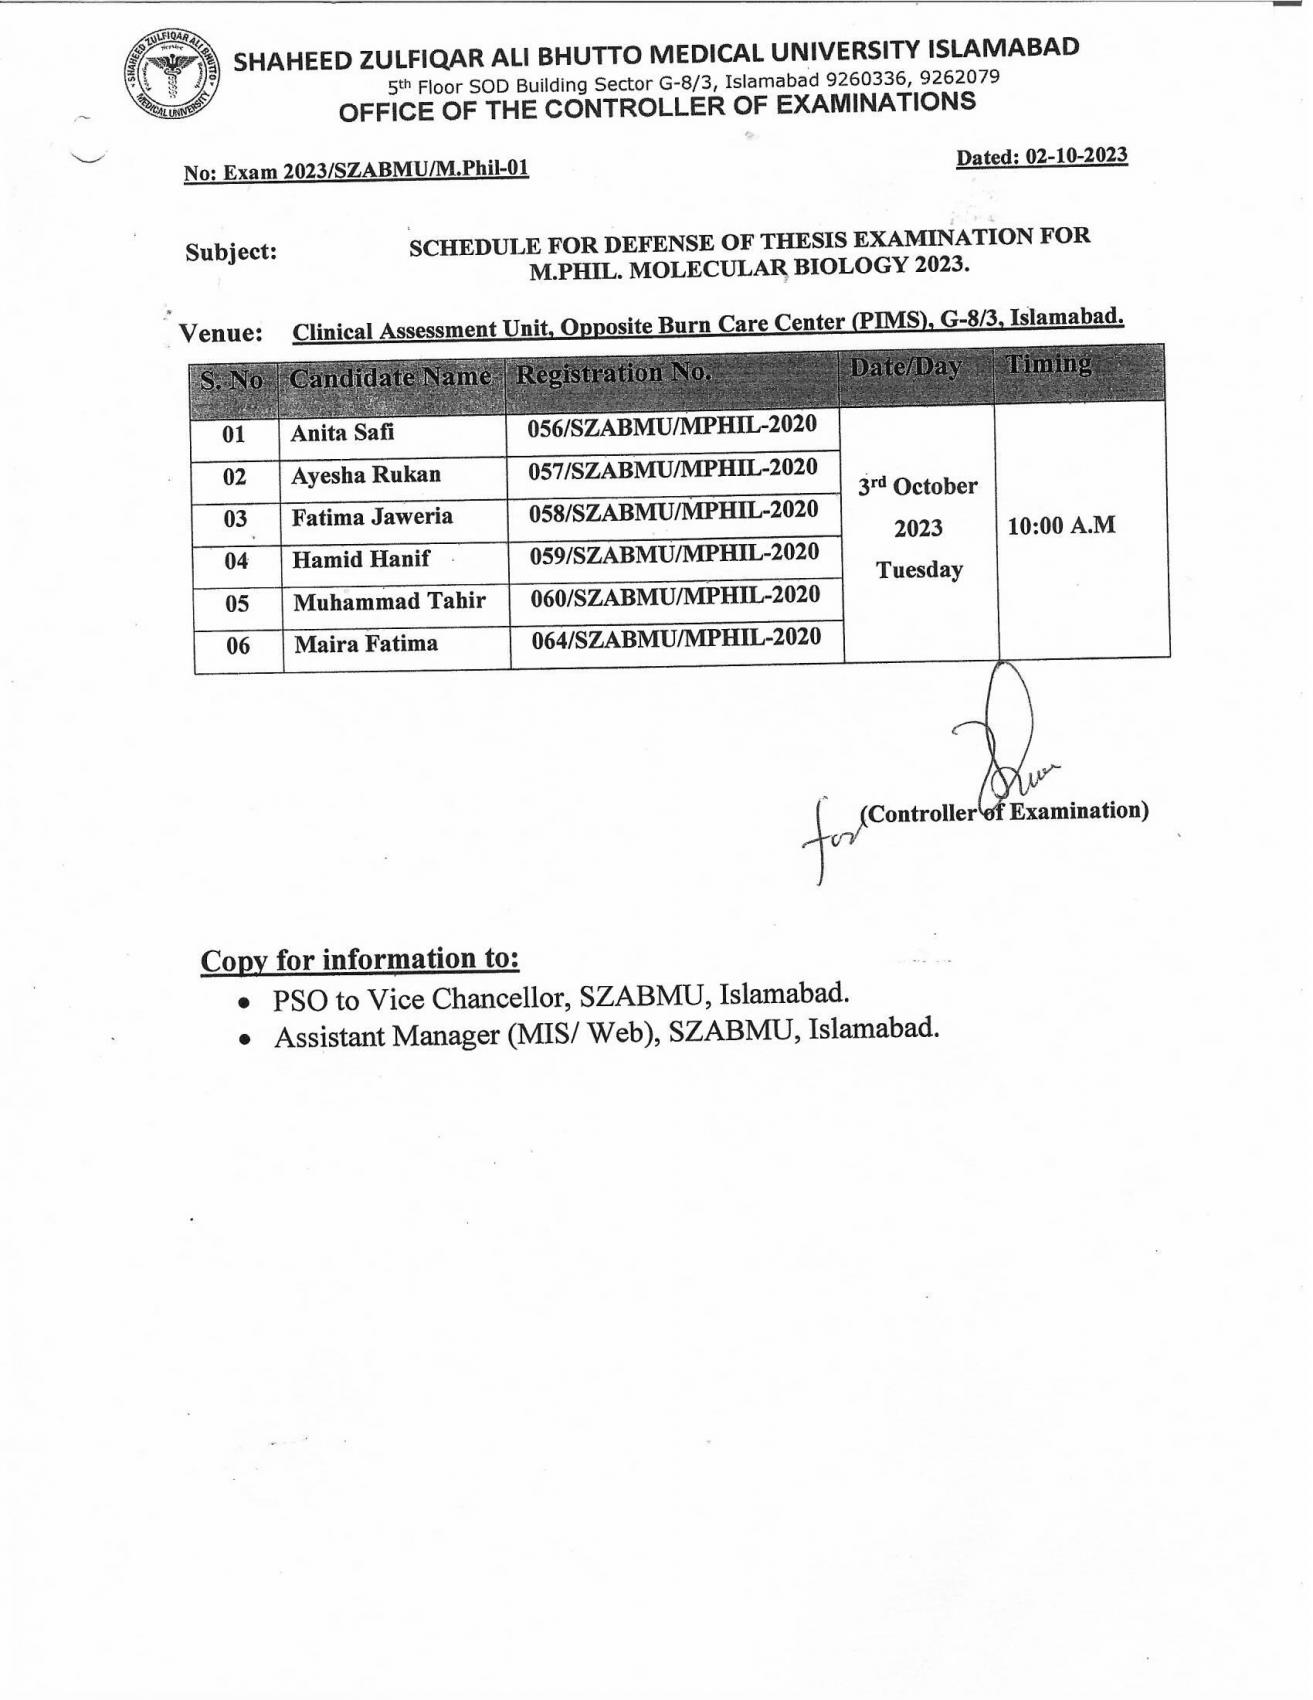 Schedule for Defense of Thesis Examinations for M.Phil. Molecular Biology 2023